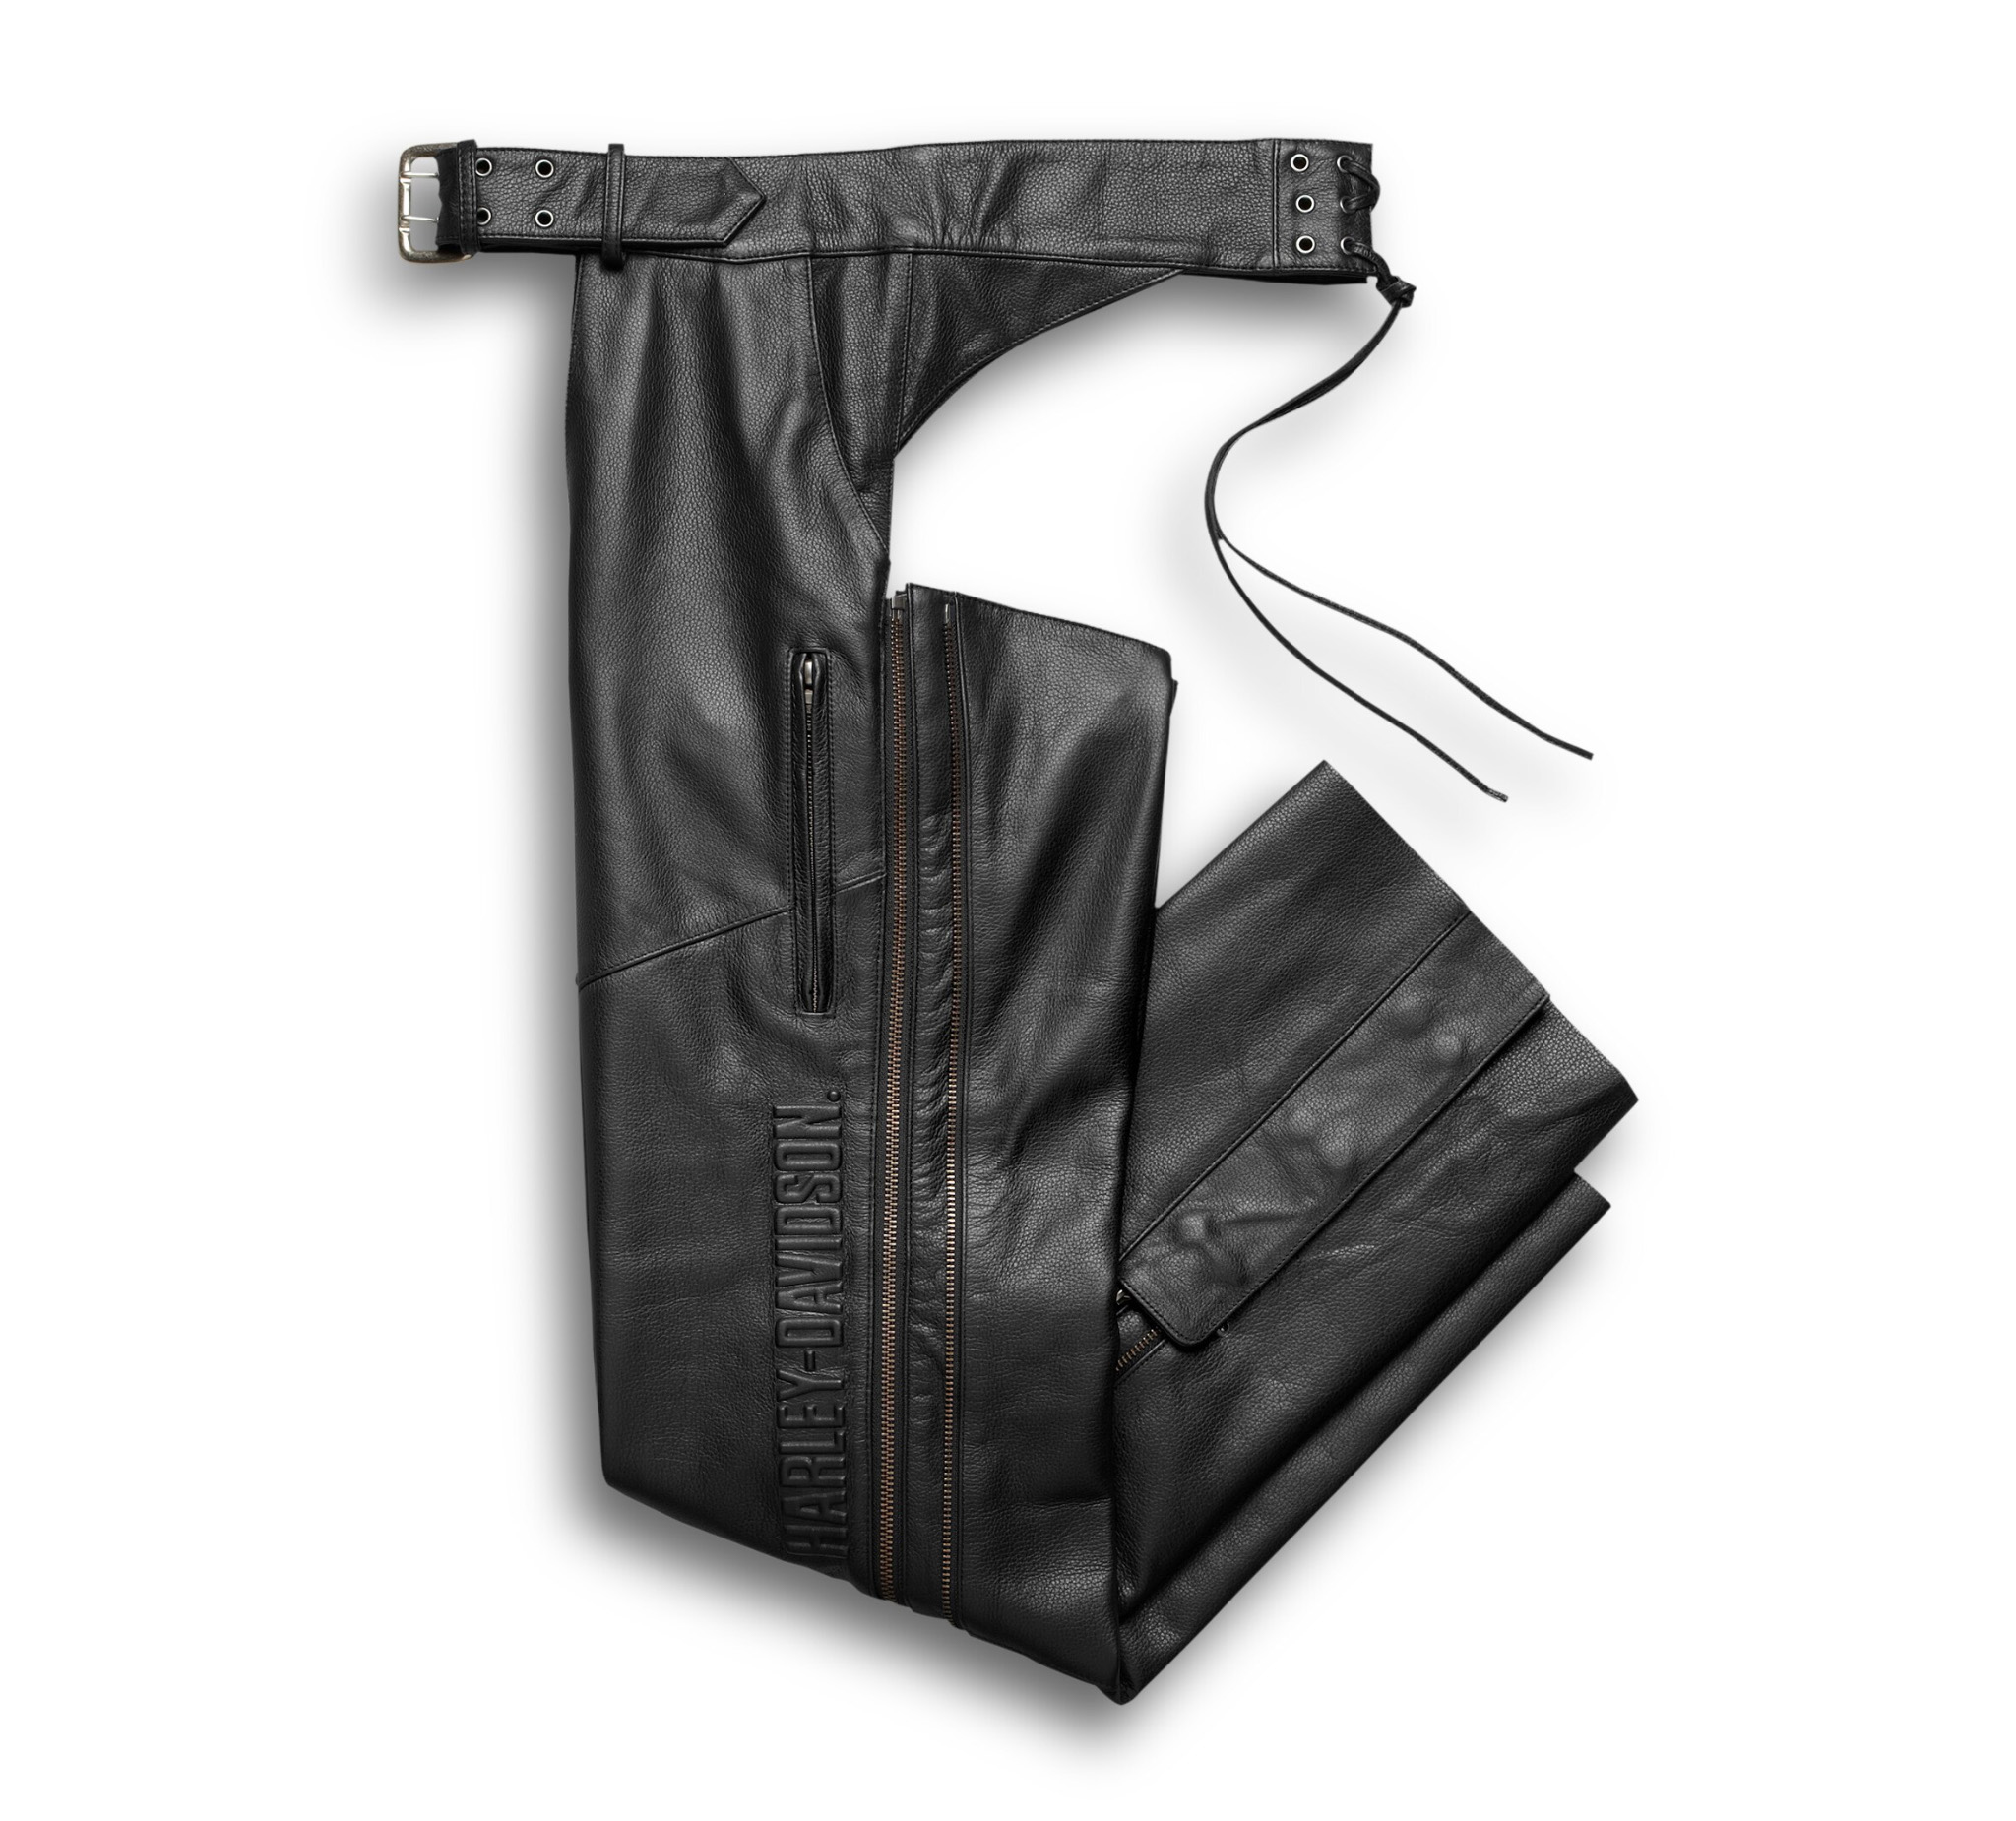 Men's Deluxe Leather Chaps - Tall